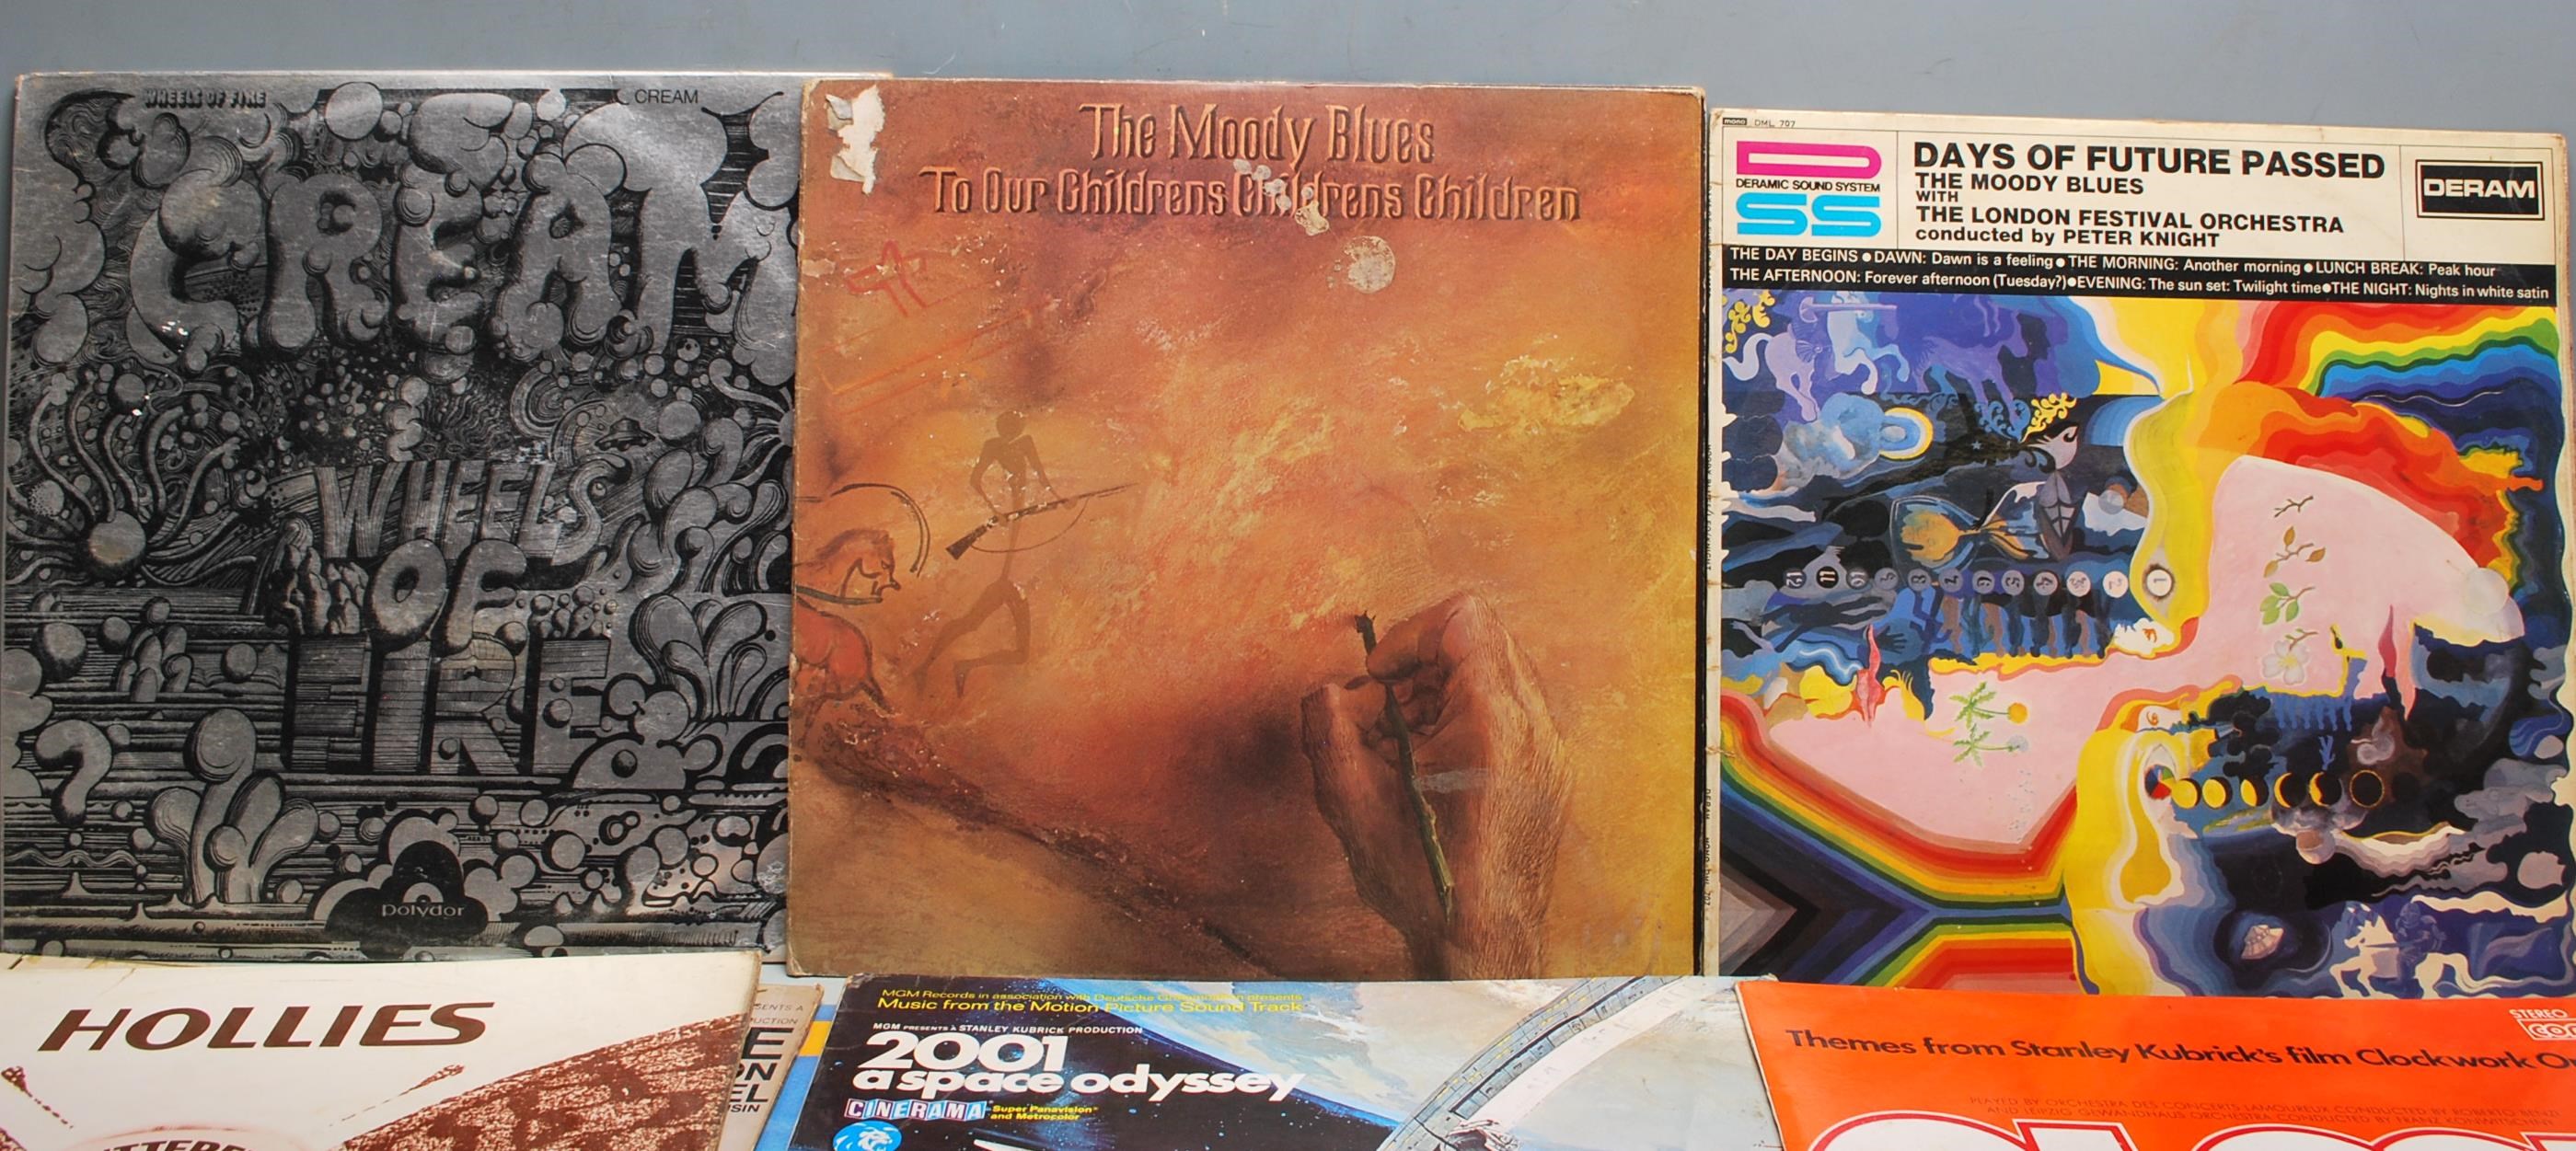 COLLECTION OF VINTAGE VINYL RECORDS - MOODY BLUES, CREAM ETC - Image 3 of 7